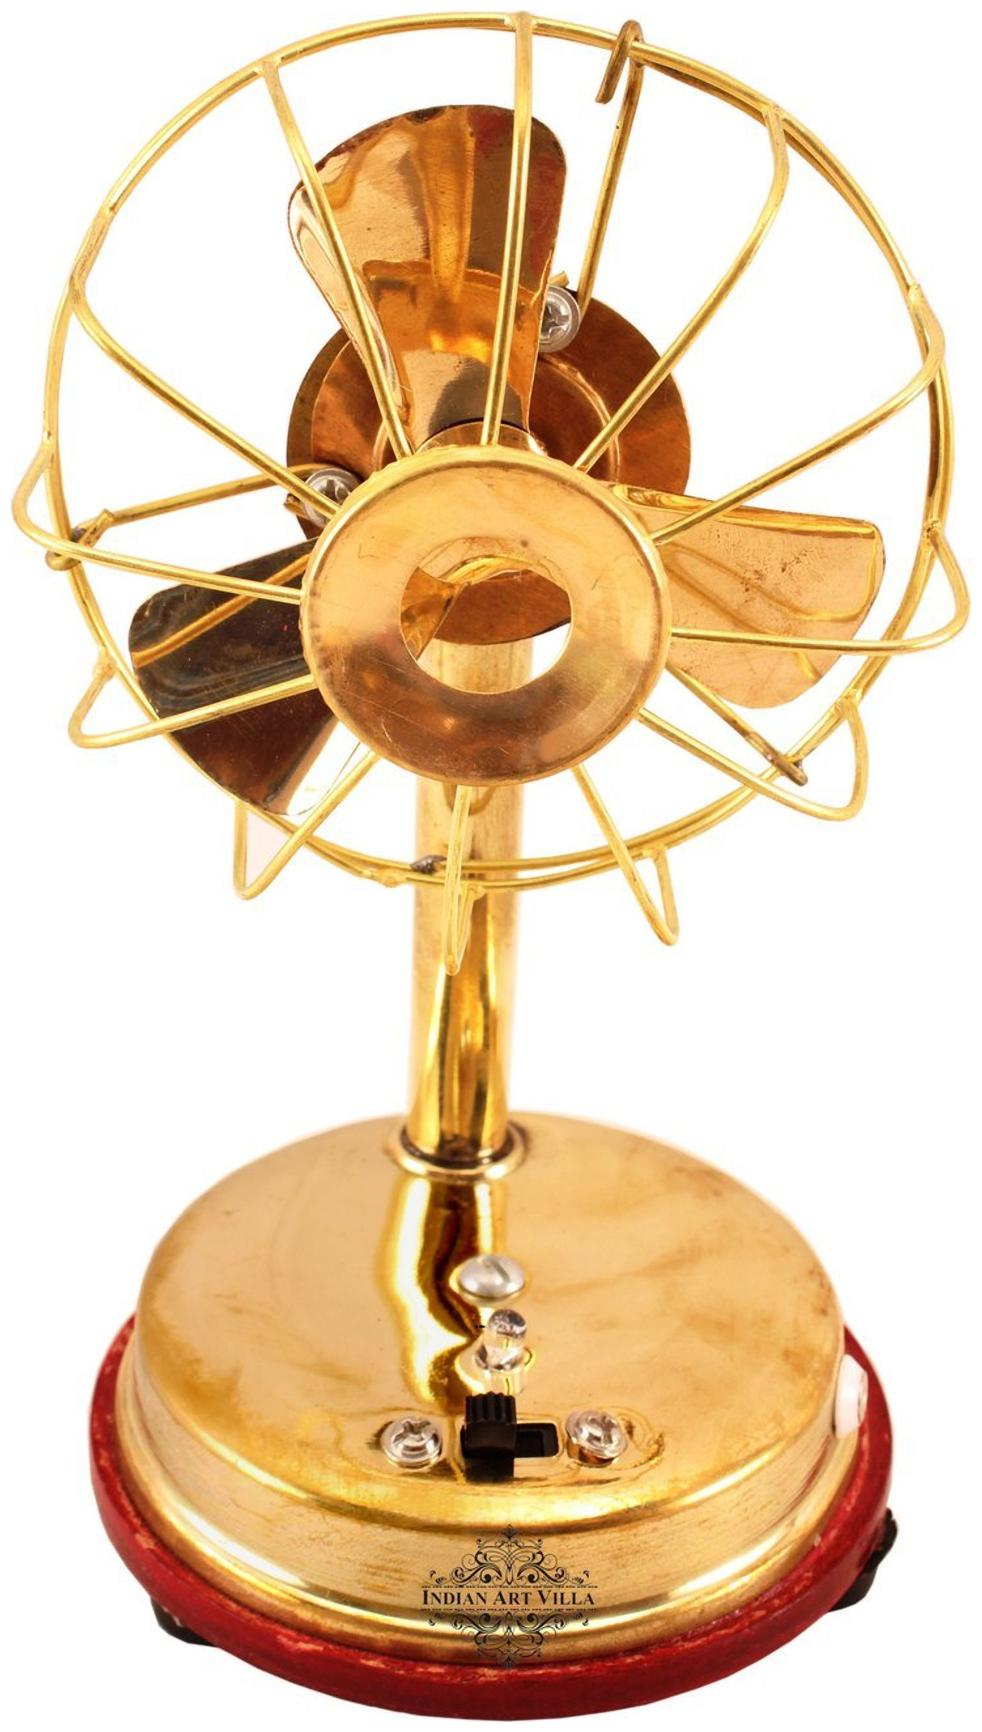 Indianartvilla Brass Battery Working Mini Table Fan Decorative Temple Home Office Showpiece Gift Item with dimensions 982 X 1732